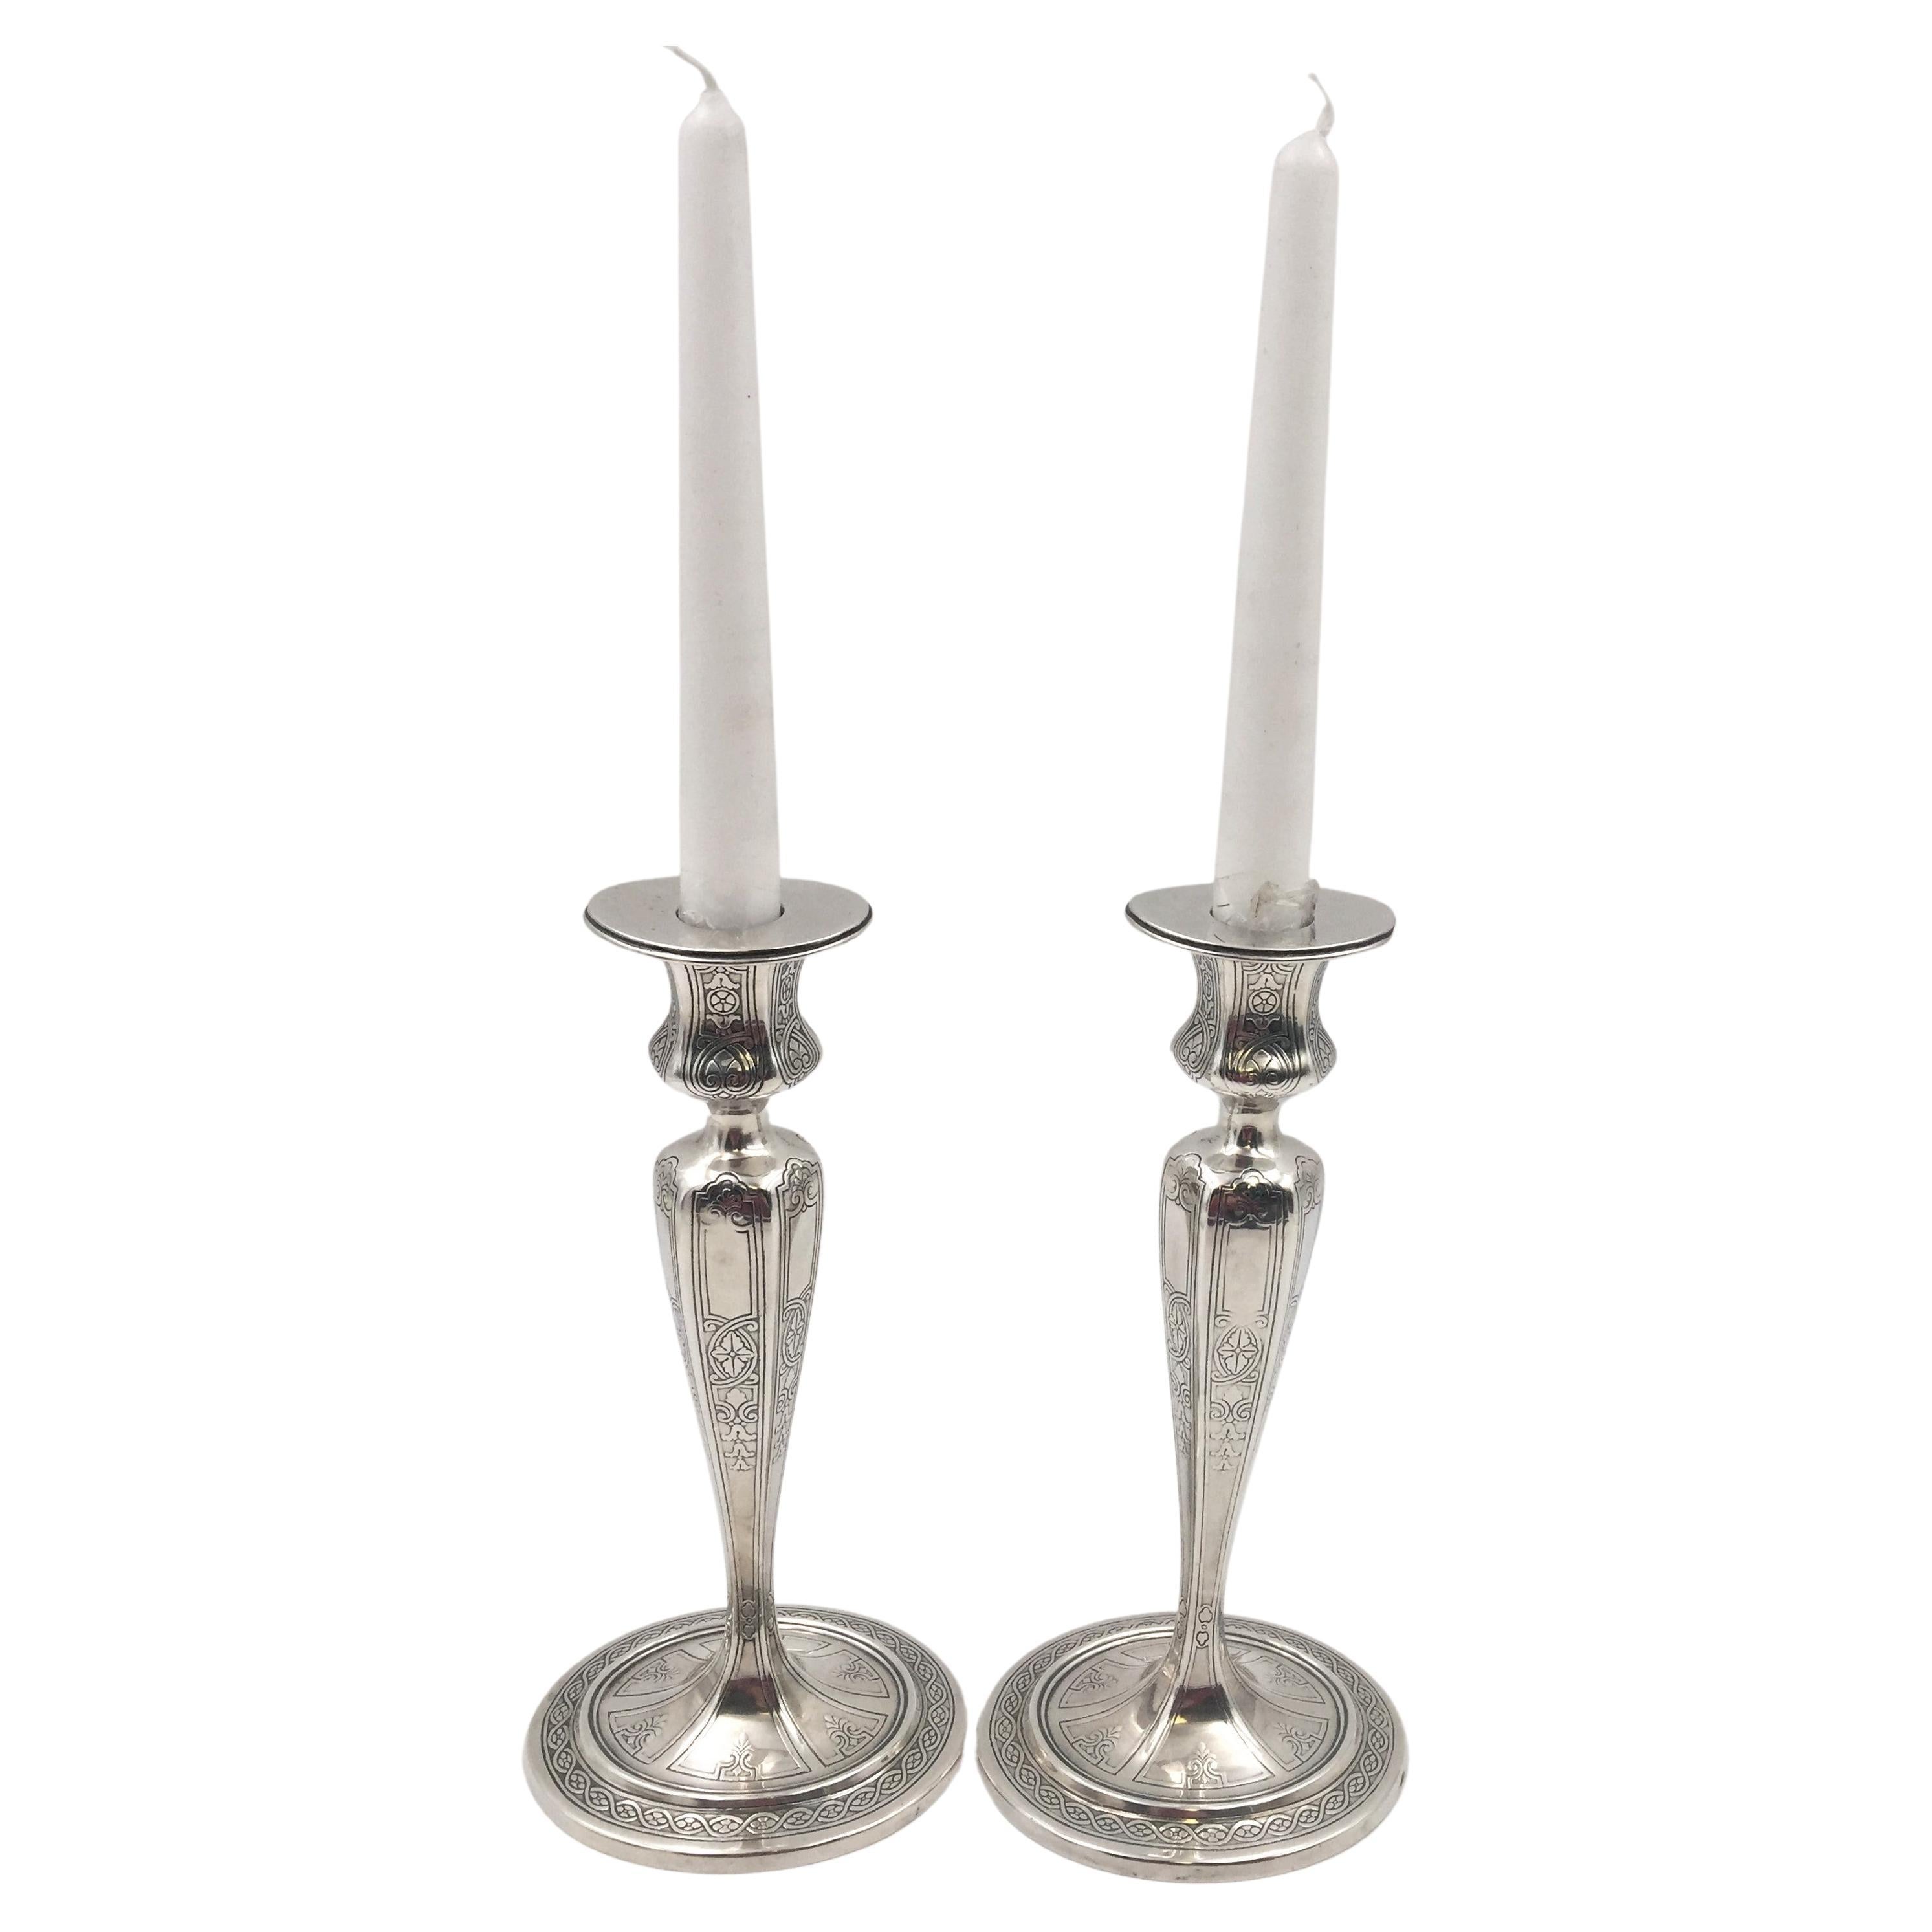 Pair of Tiffany & Co. Sterling Silver 1910 Candlesticks in Art Deco Style